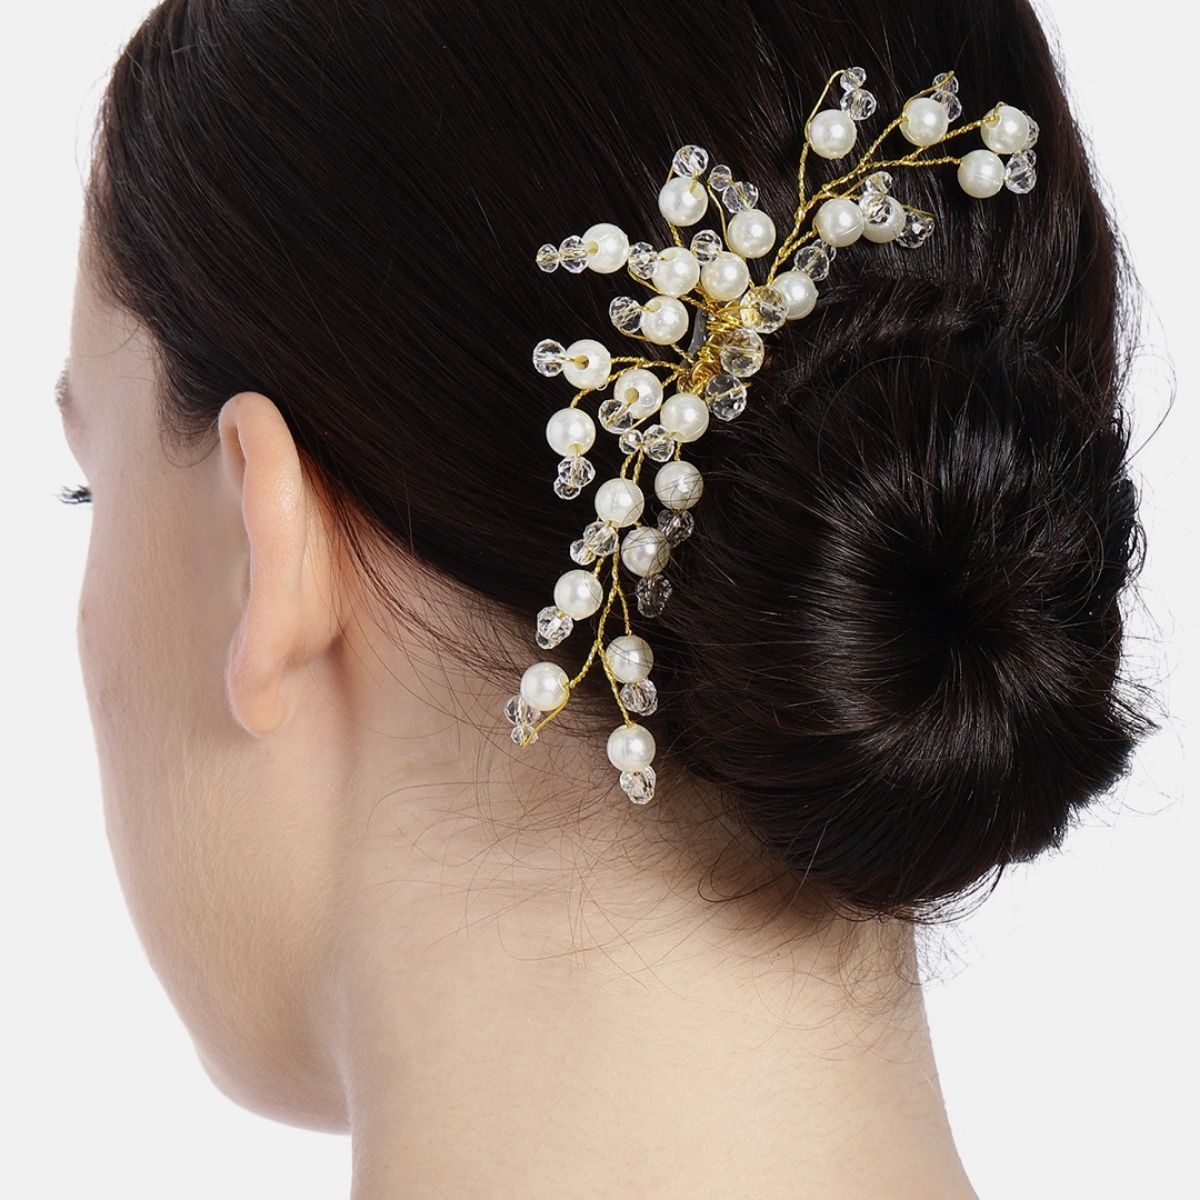 Accessher Gold Plated Beaded Tiara Comb Pin-Jooda Pin Hair Accessories With Pearls For Women & Girls